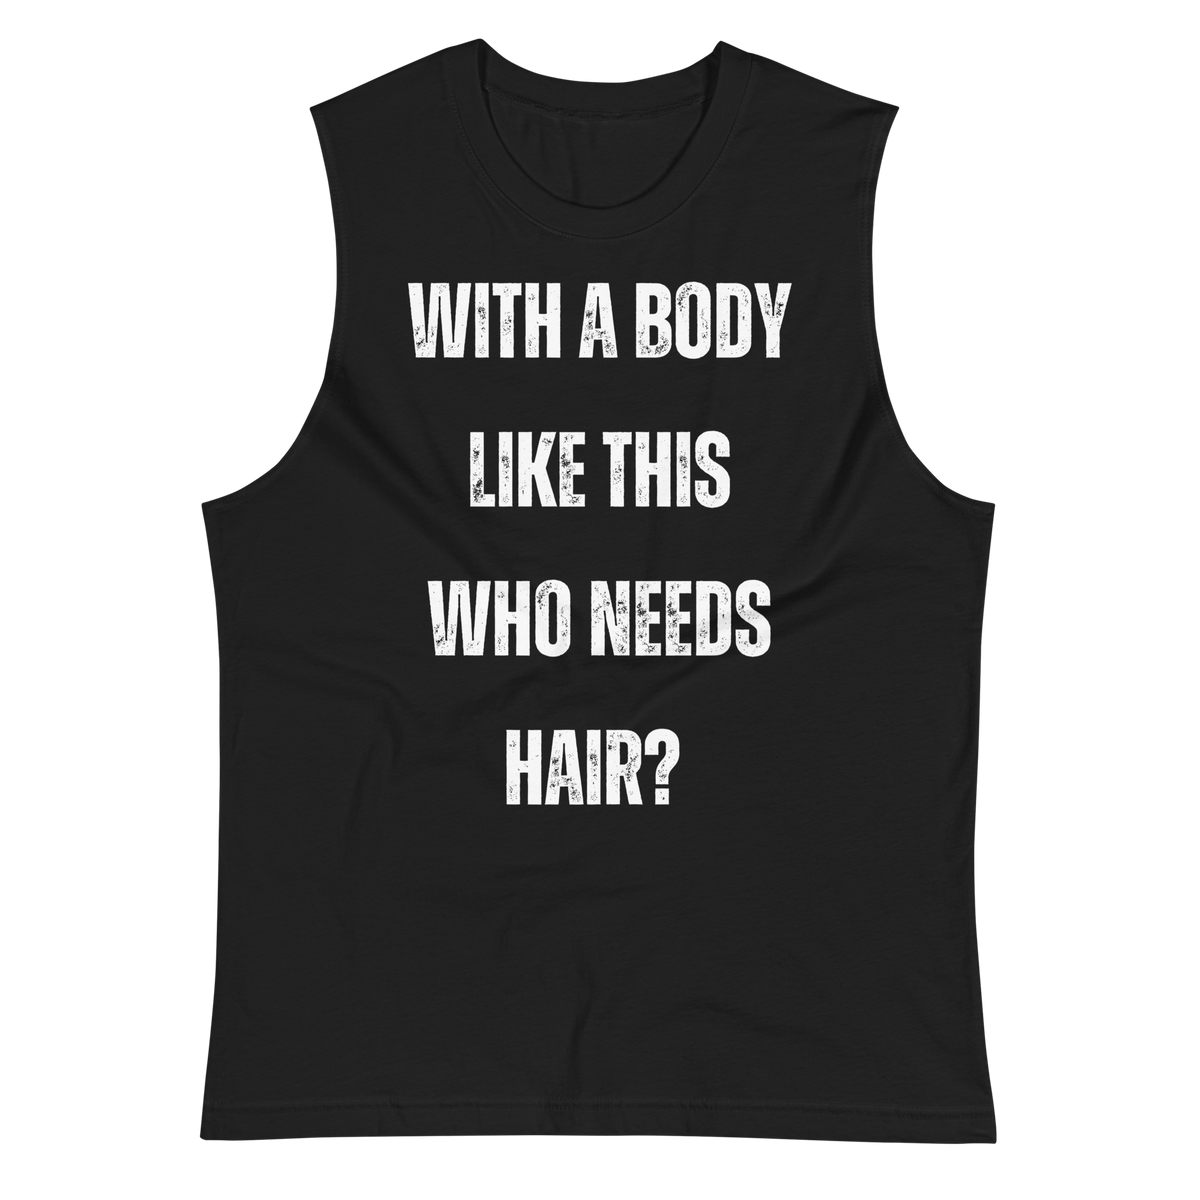 With a Body Like This Who Needs Hair, Funny Shirt for Men, Fathers Day Gift, Husband Gift, Humor Tshirt, Dad Gift, Mens Shirt, Sarcastic Tee, muscle shirt, top tank, sleeveless tee